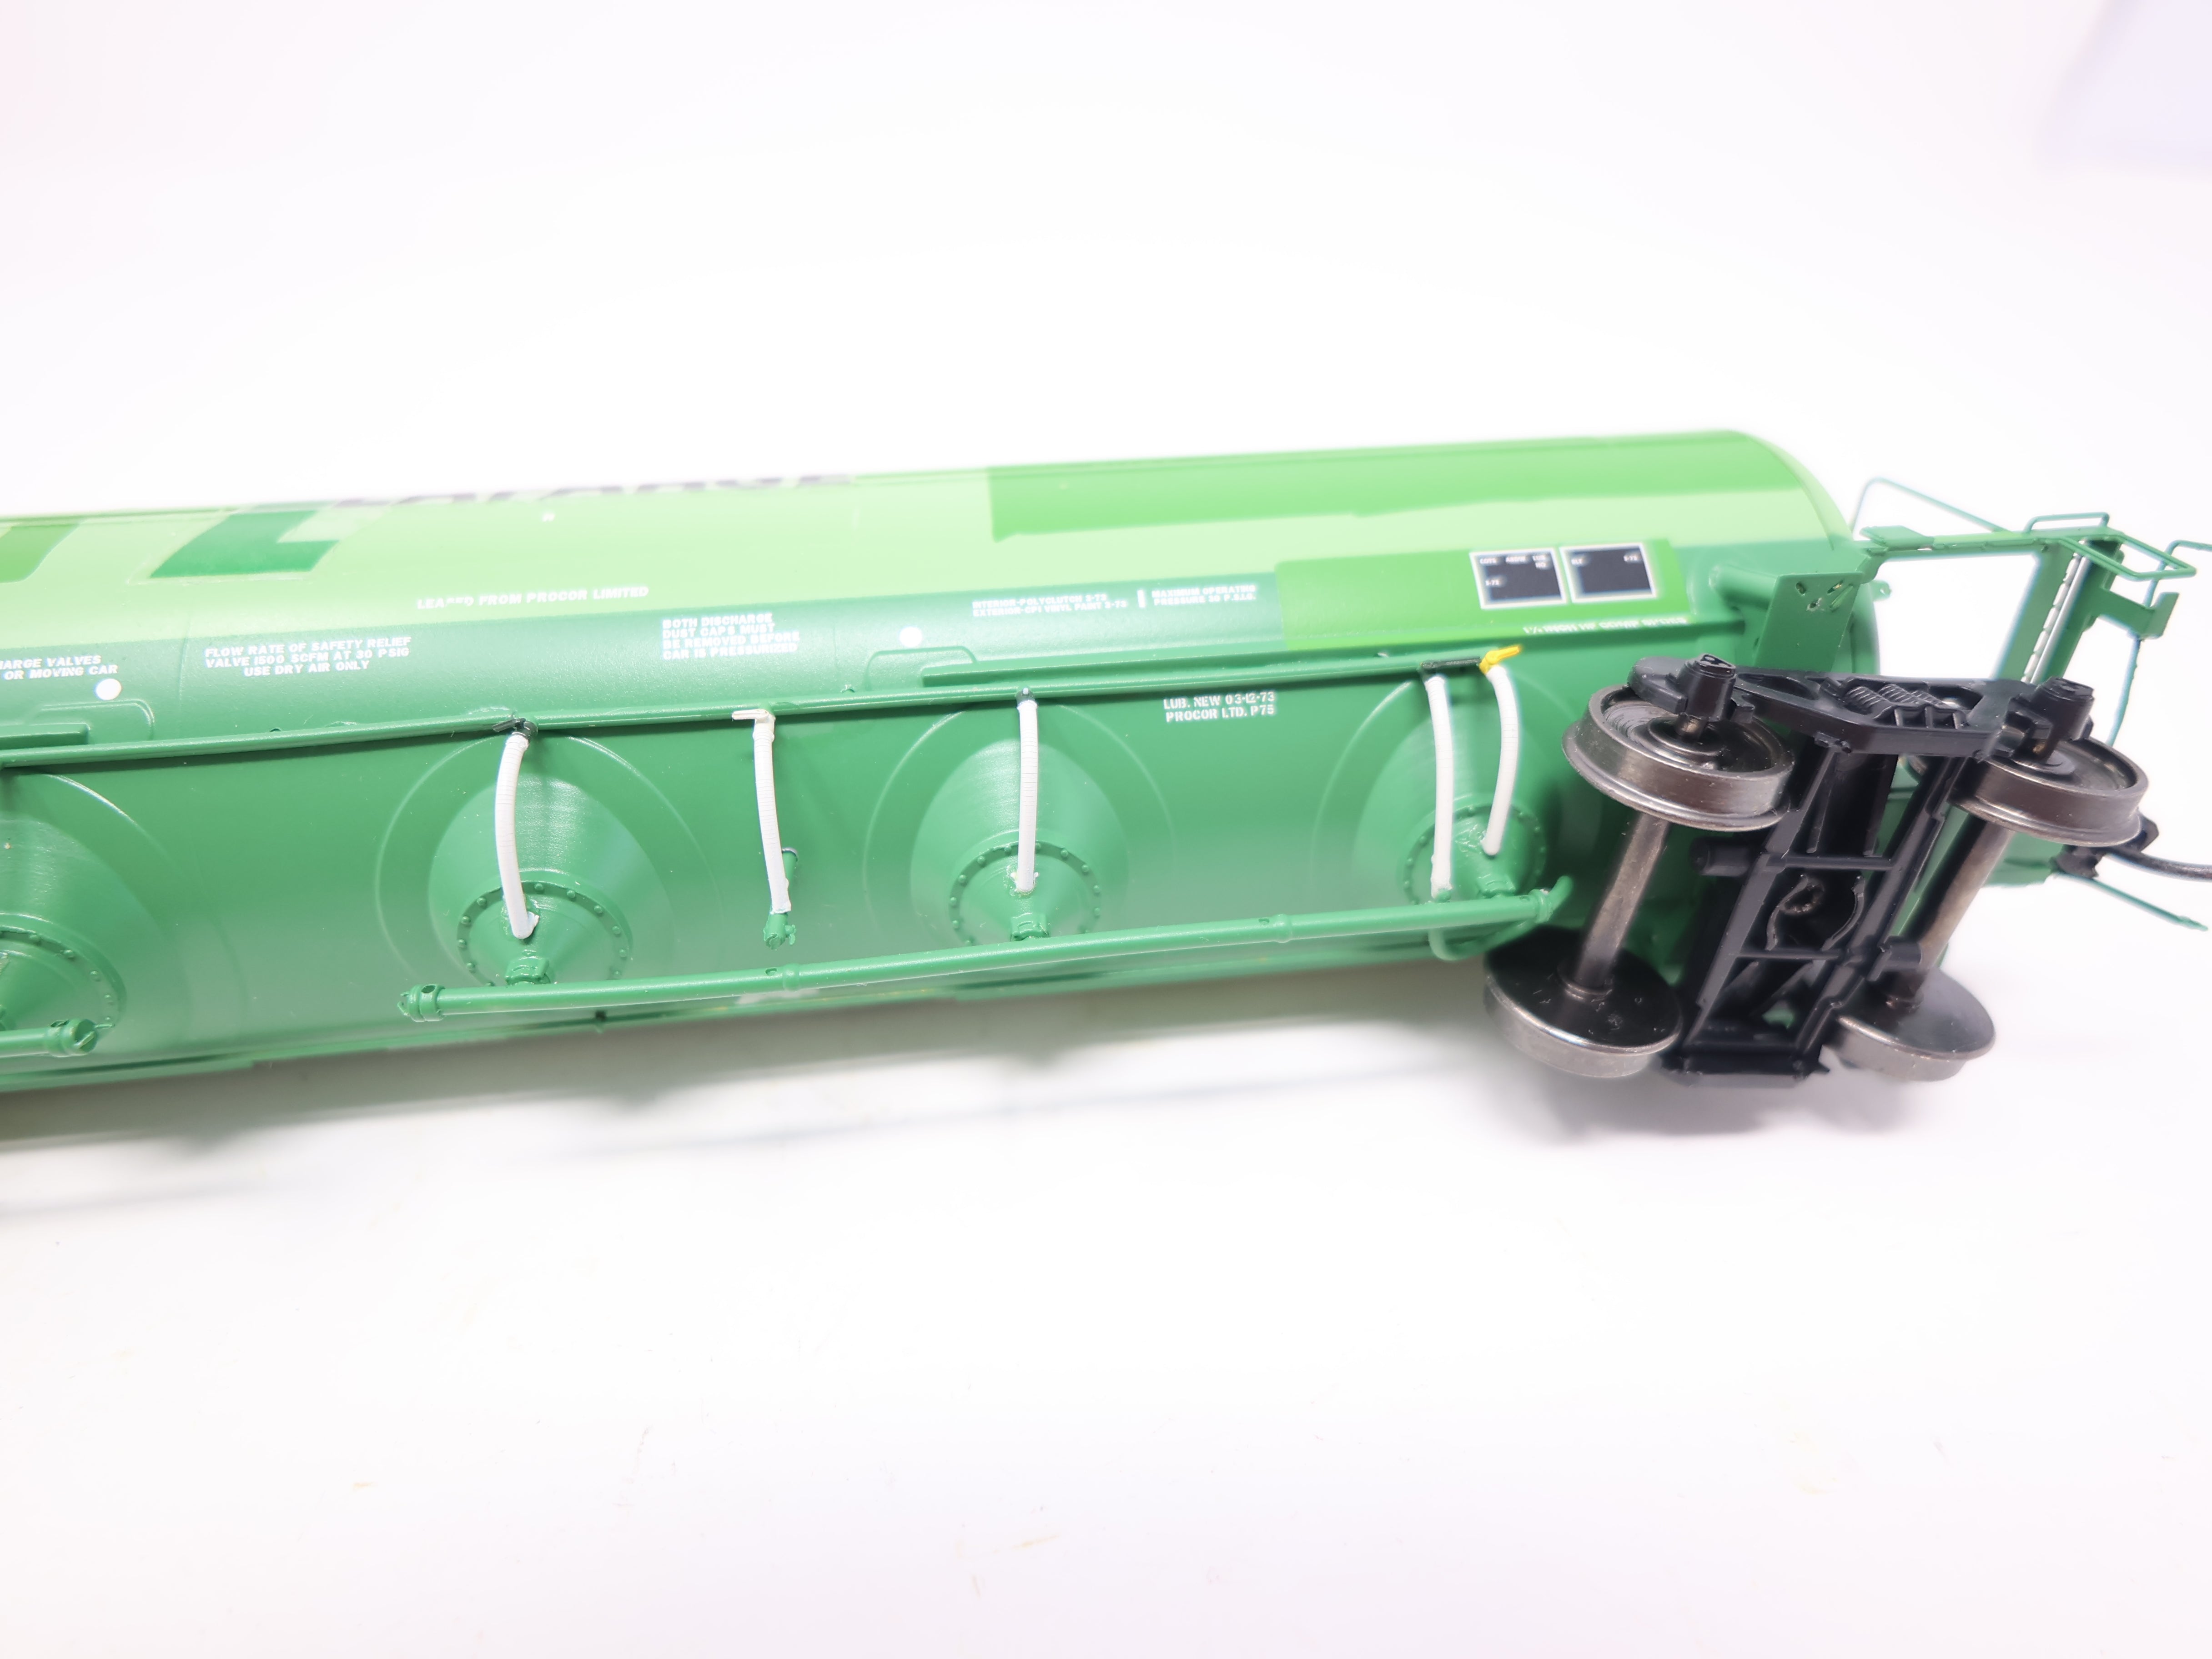 USED Intermountain 48911-03 HO Scale, Pressure Flow Hopper, Lafarge Cement LAFX #730004, Custom Decals